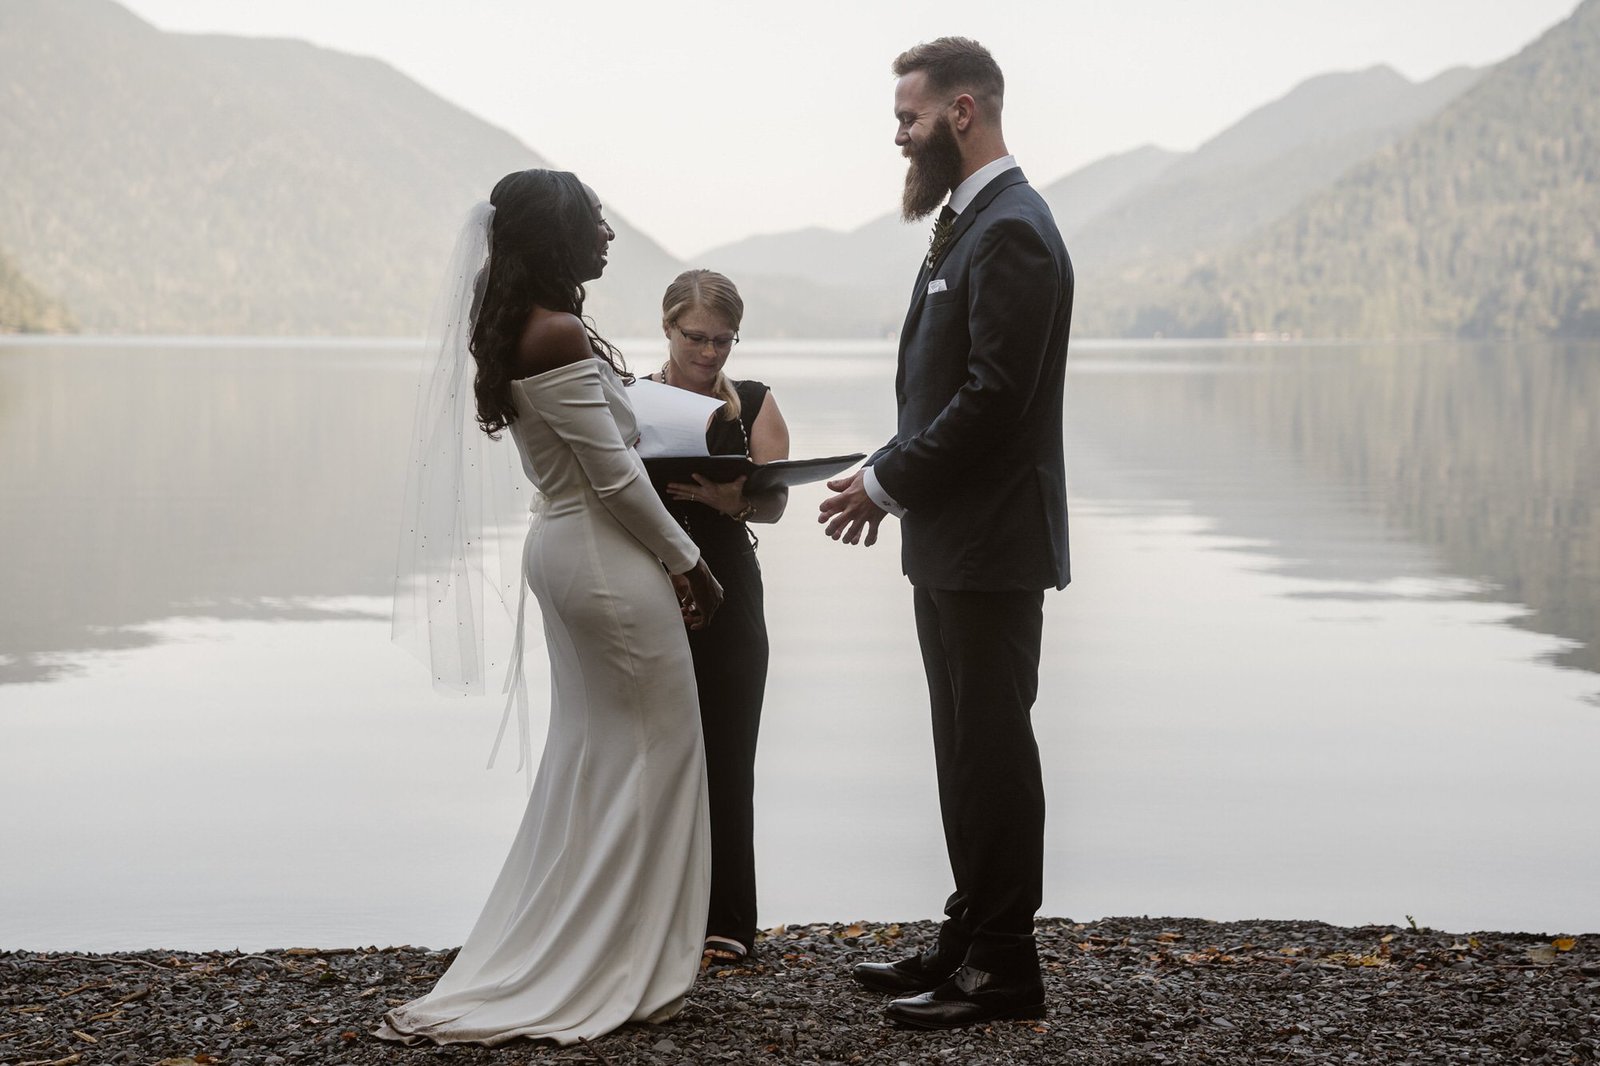 Intimate wedding ceremony at Olympic National Park.